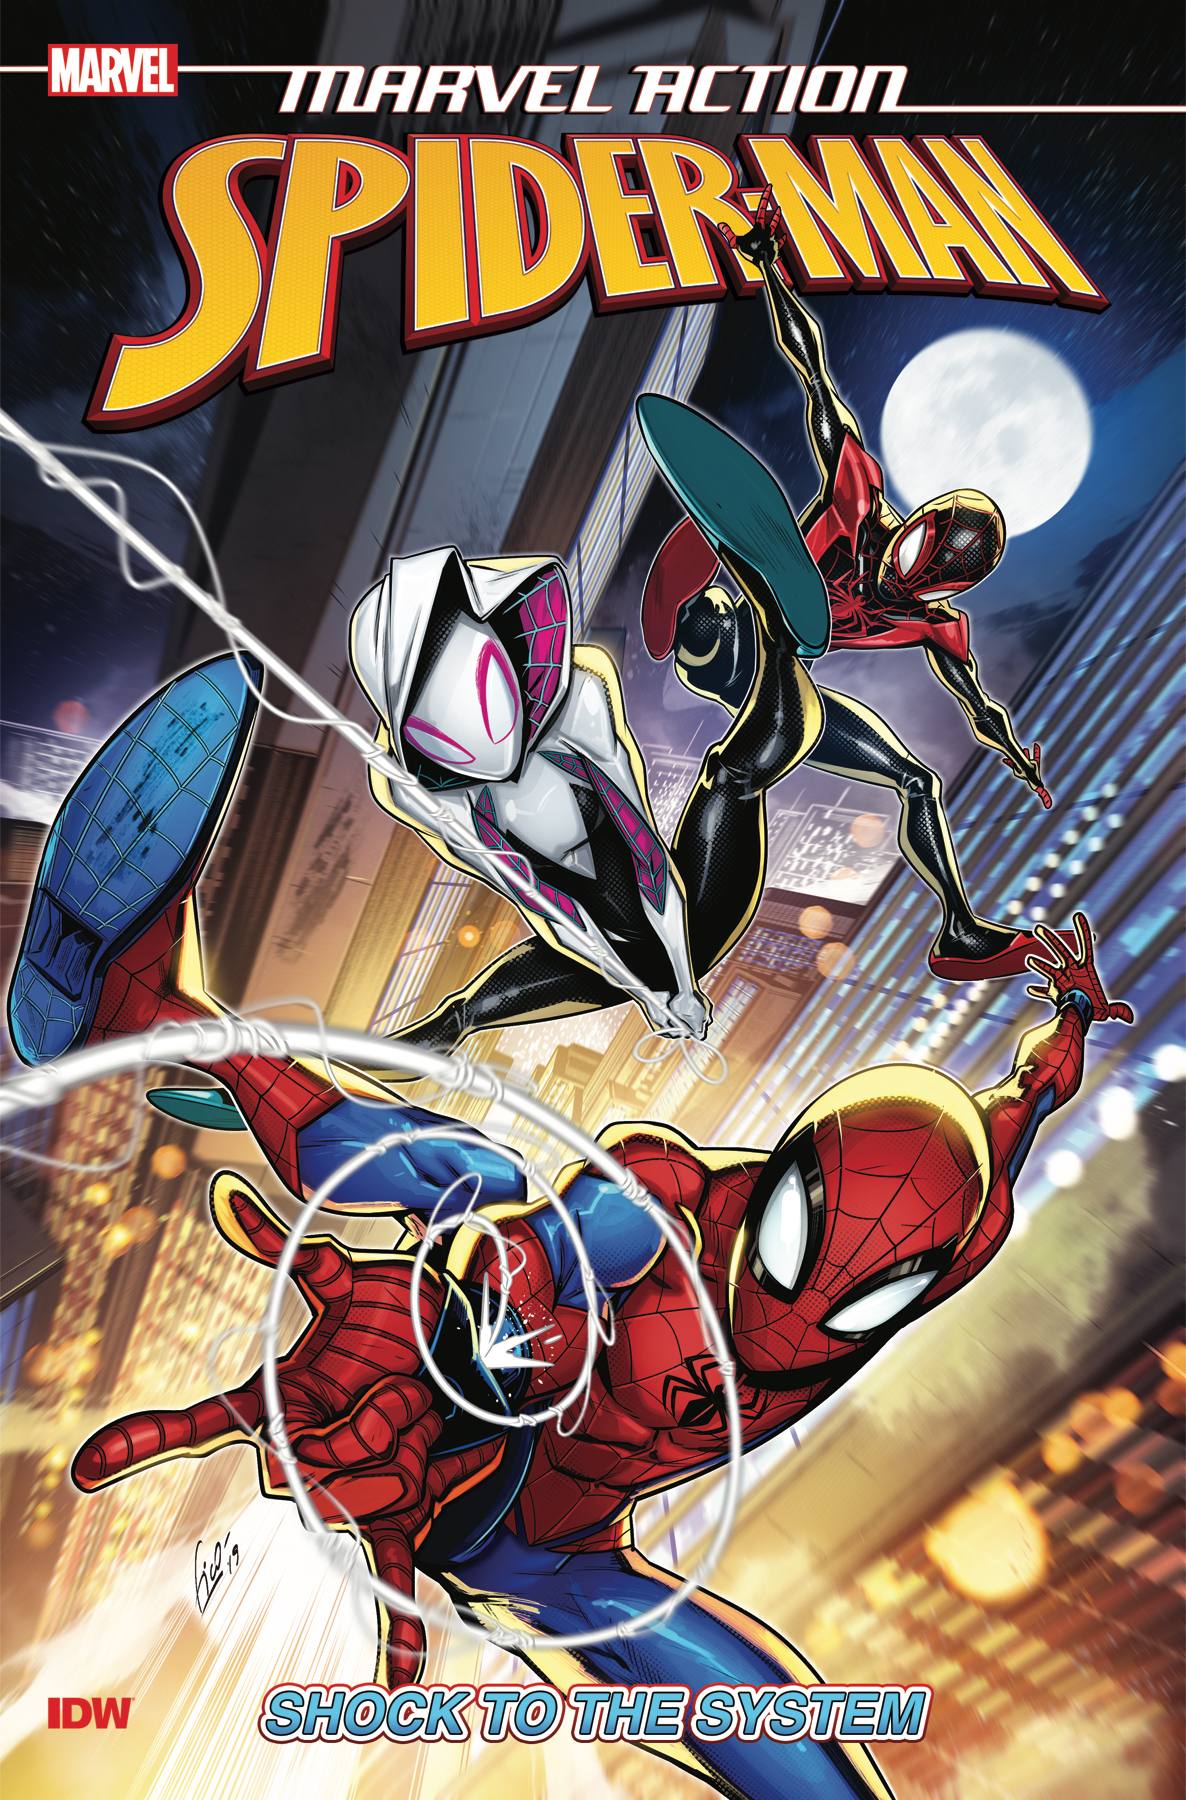 MARVEL ACTION SPIDER-MAN SHOCK TO THE SYSTEM TP